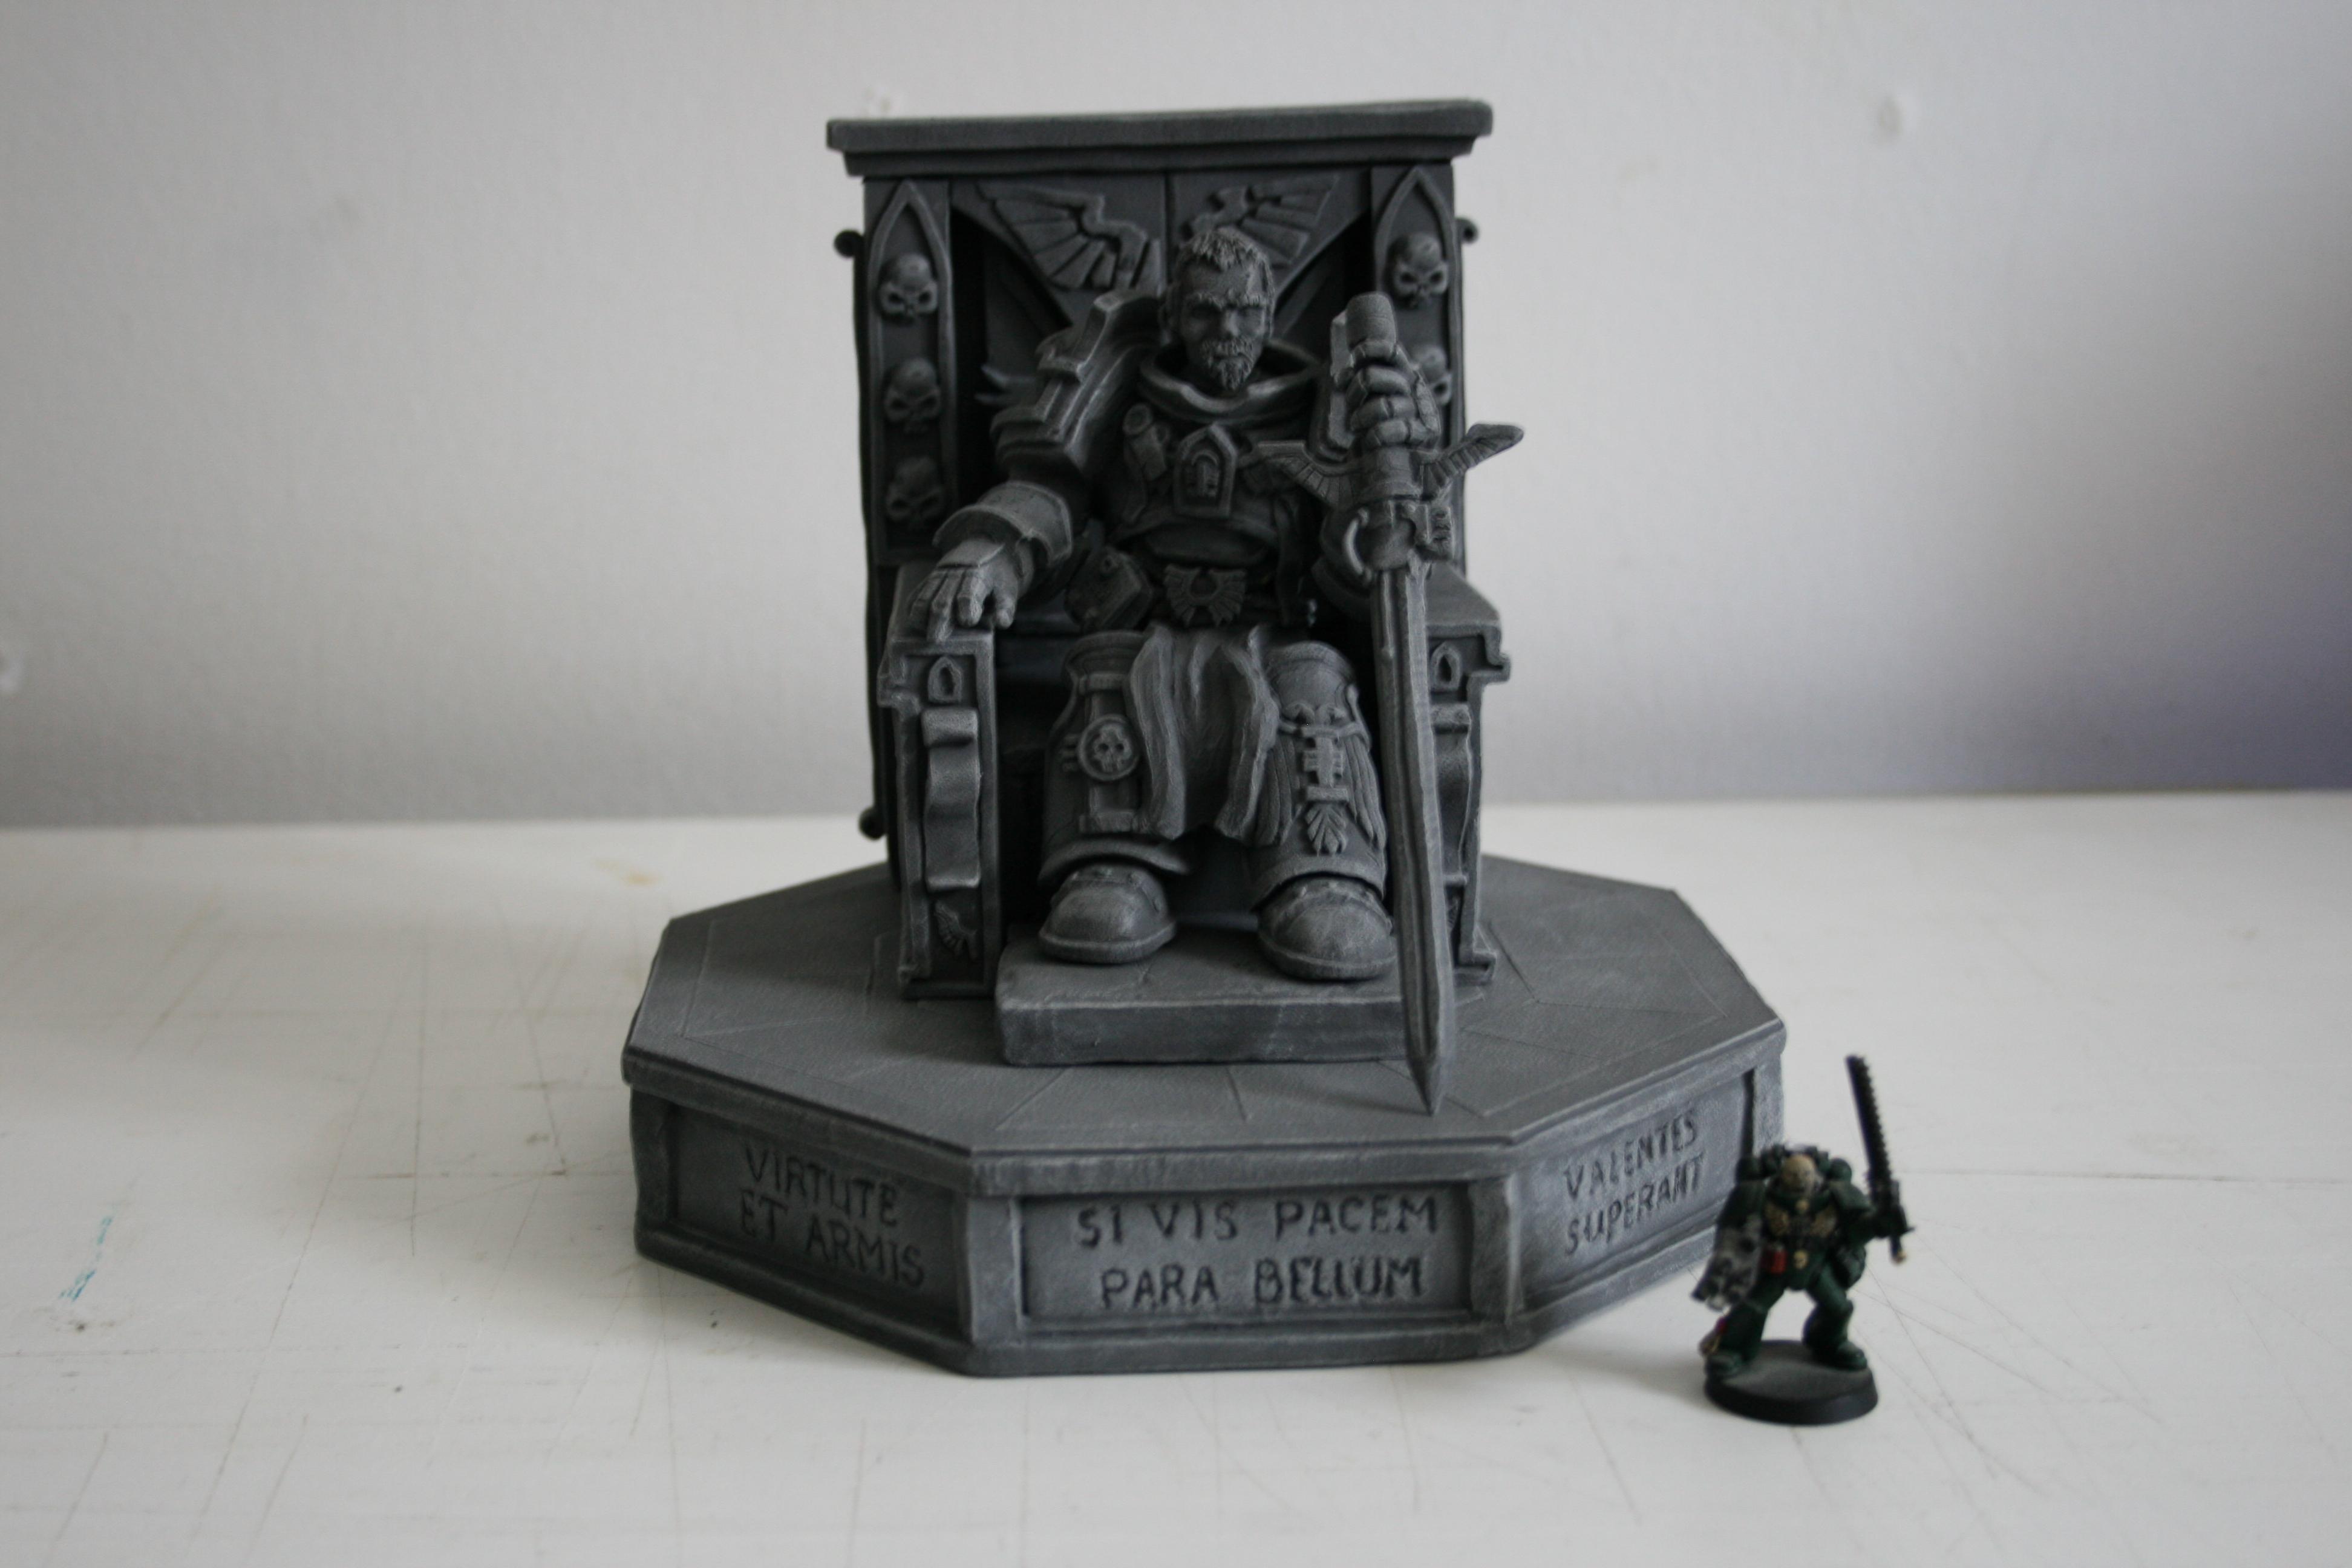 40k Inquisitor, Chaos, Chaos Lord, Chaos Space Marines, Imperial, Imperium, Inquisition, Inquisitor, Inquisitor Lord, Lord Inquisitor, Monument, Scatch Build, Scratch Build, Sculpting, Sculpture, Space Marines, Statue, Statues, Terrain, Throne, Warhammer 40,000, Warhammer Fantasy